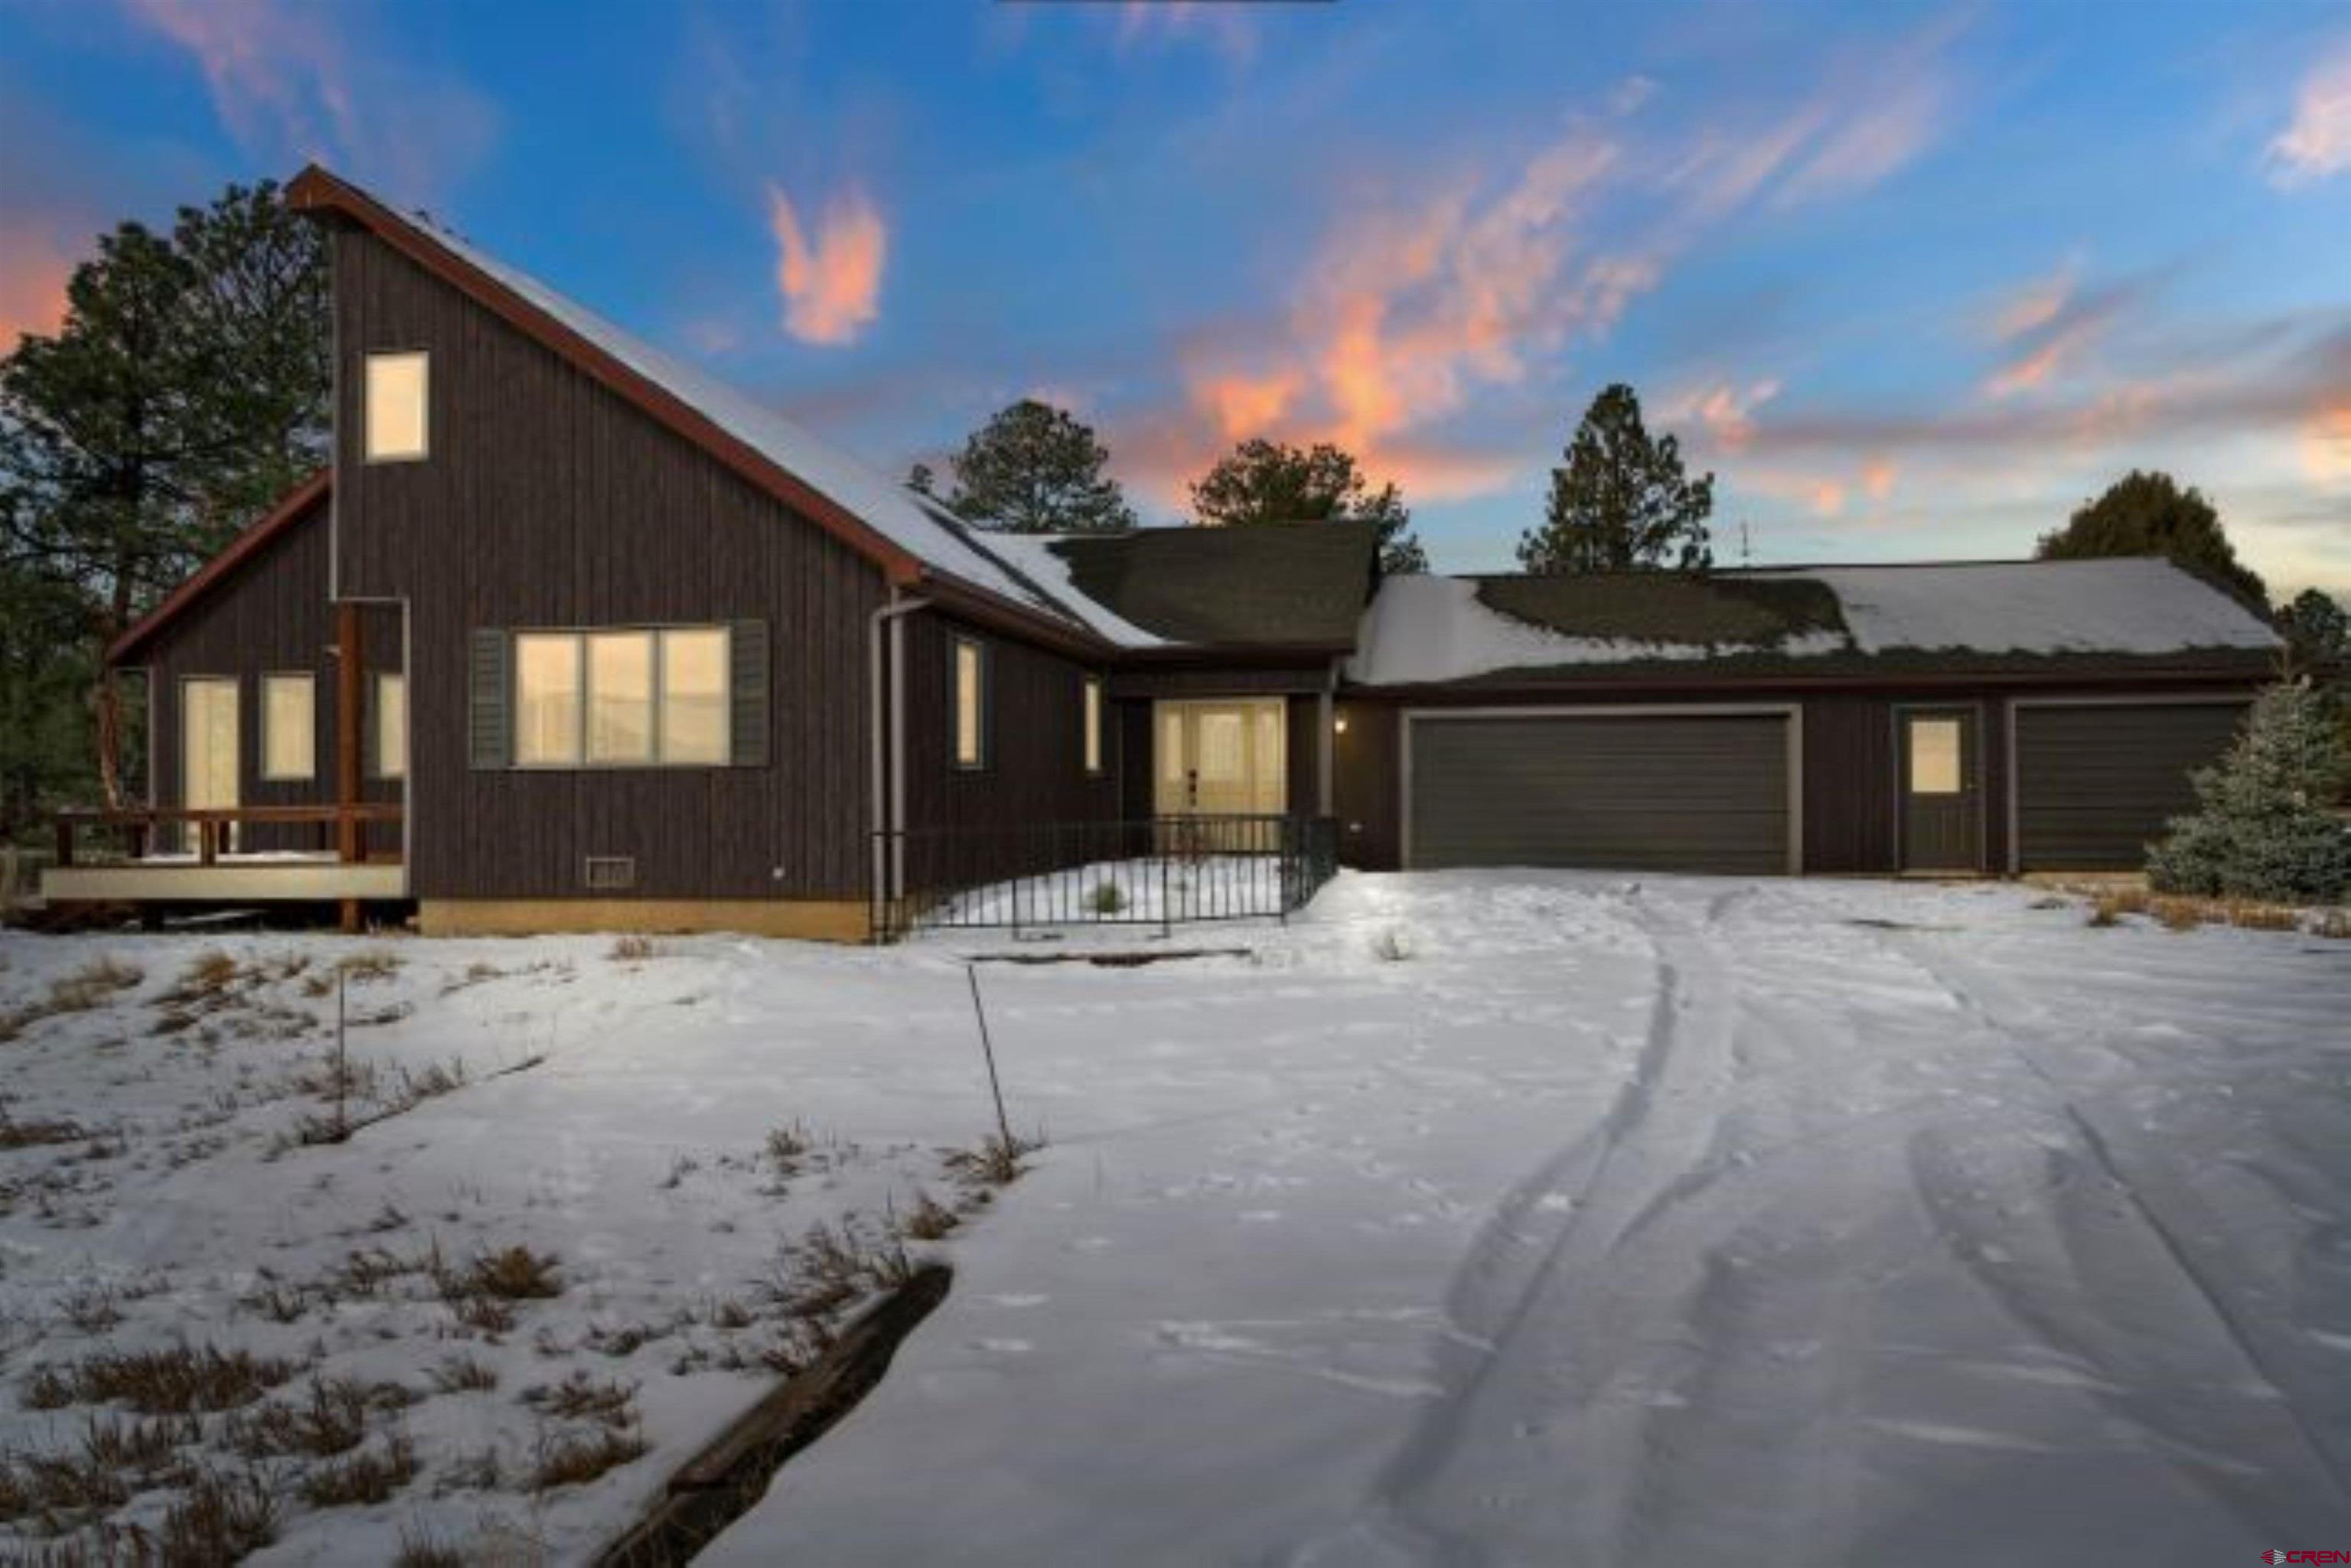 A spacious, low maintenance home on a superb drop-away lot. With 4 Bedrooms and 2.5 Baths there is room for all your projects. With some thinning of the downhill trees, the primary view could be shifted to the Sneffels Range. Historically the home favored the Cimarron views from the breakfast room, but both mountain ranges are visible from the 1st and 2nd floors.  An Indian Pointer Tree in the back yard directs you towards Orvis Hot Springs. The homesite is relatively level, then the lot rolls-away to the Open Space below and the neighborhood hiking trails. Gracious porches plus a gazebo provide plentiful outdoor entertainment space. An attached greenhouse, and an ancillary hot room provide protection from the numerous creatures including, deer, squirrels, etc. The heated shop is also an extra garage. A walk-in attic space adds to the storage. The home has not been lived in a number of years, the kitchen could use a refresh/update. Sub-floor hydronic heat was added when natural gas became available. Fiber Optic conduit is already at the street for your home office.